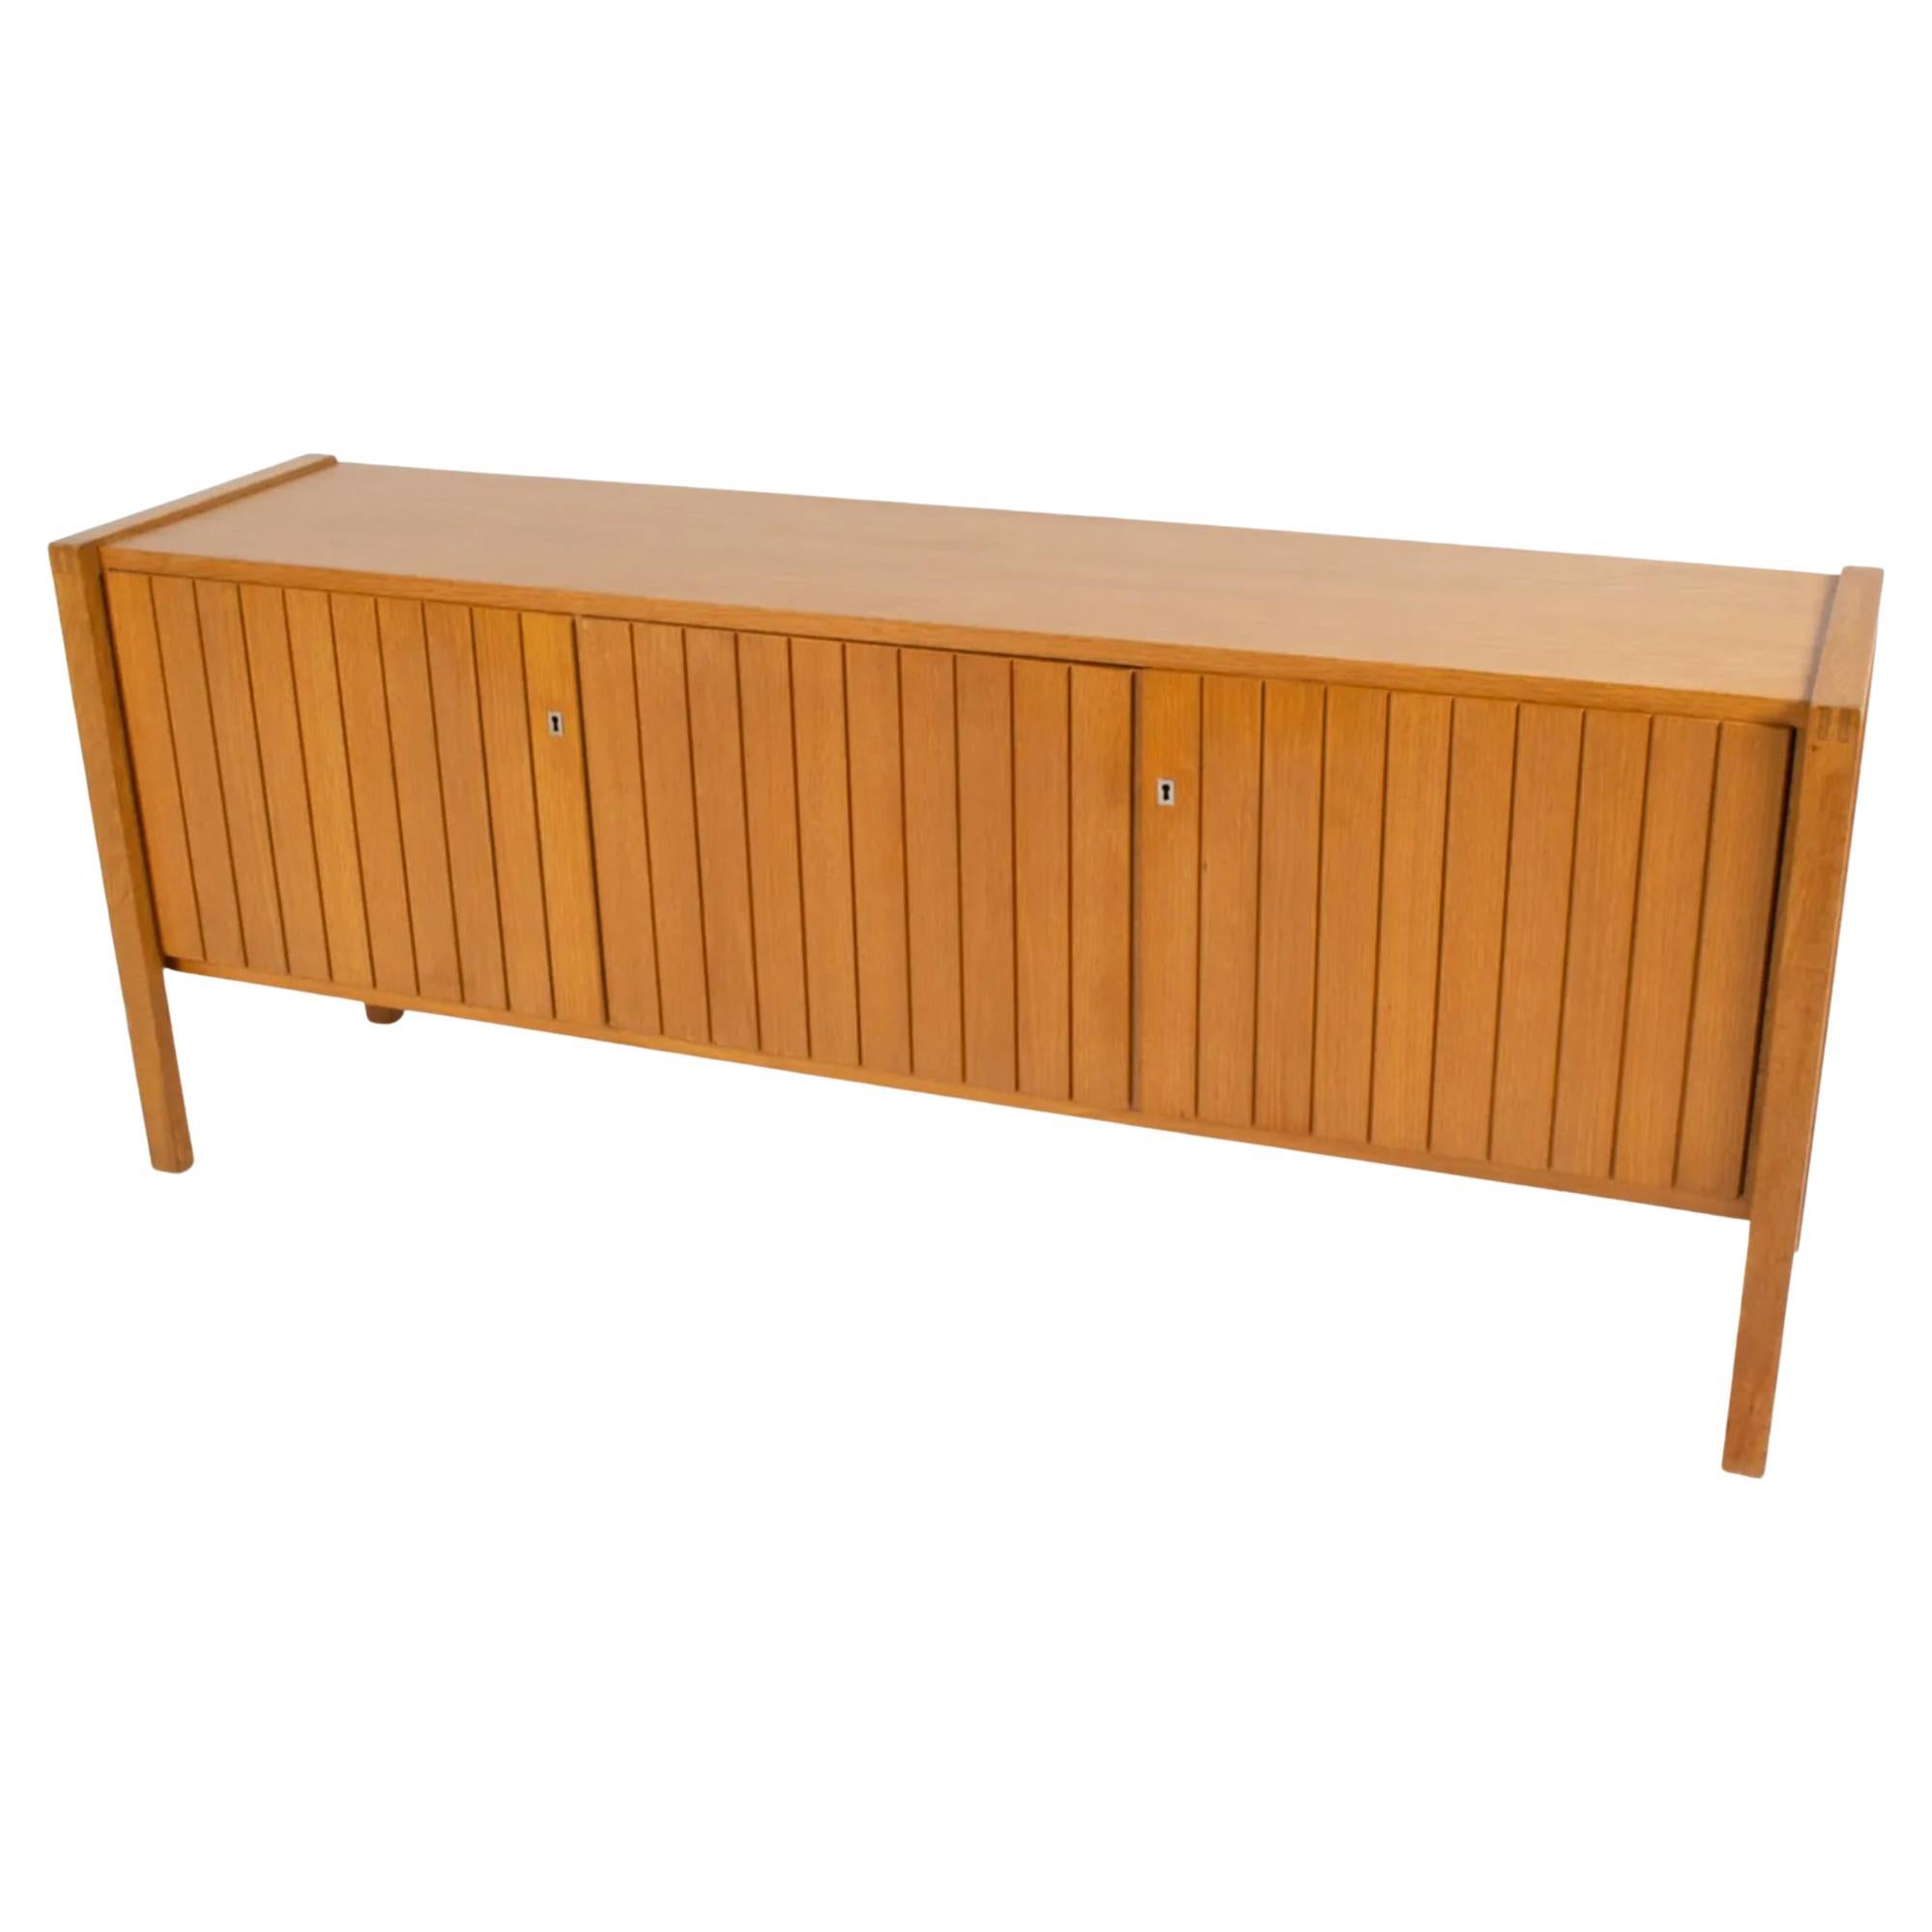 Mid Century modern German Oak Paneled Credenza 3 door with key. Beautiful Modernist design simple and high end woodworking. Has 3 doors with 2 locks. Comes with a key. Made In Germany circa 1960 - Located in Brooklyn NYC. Very Clean and Ready for